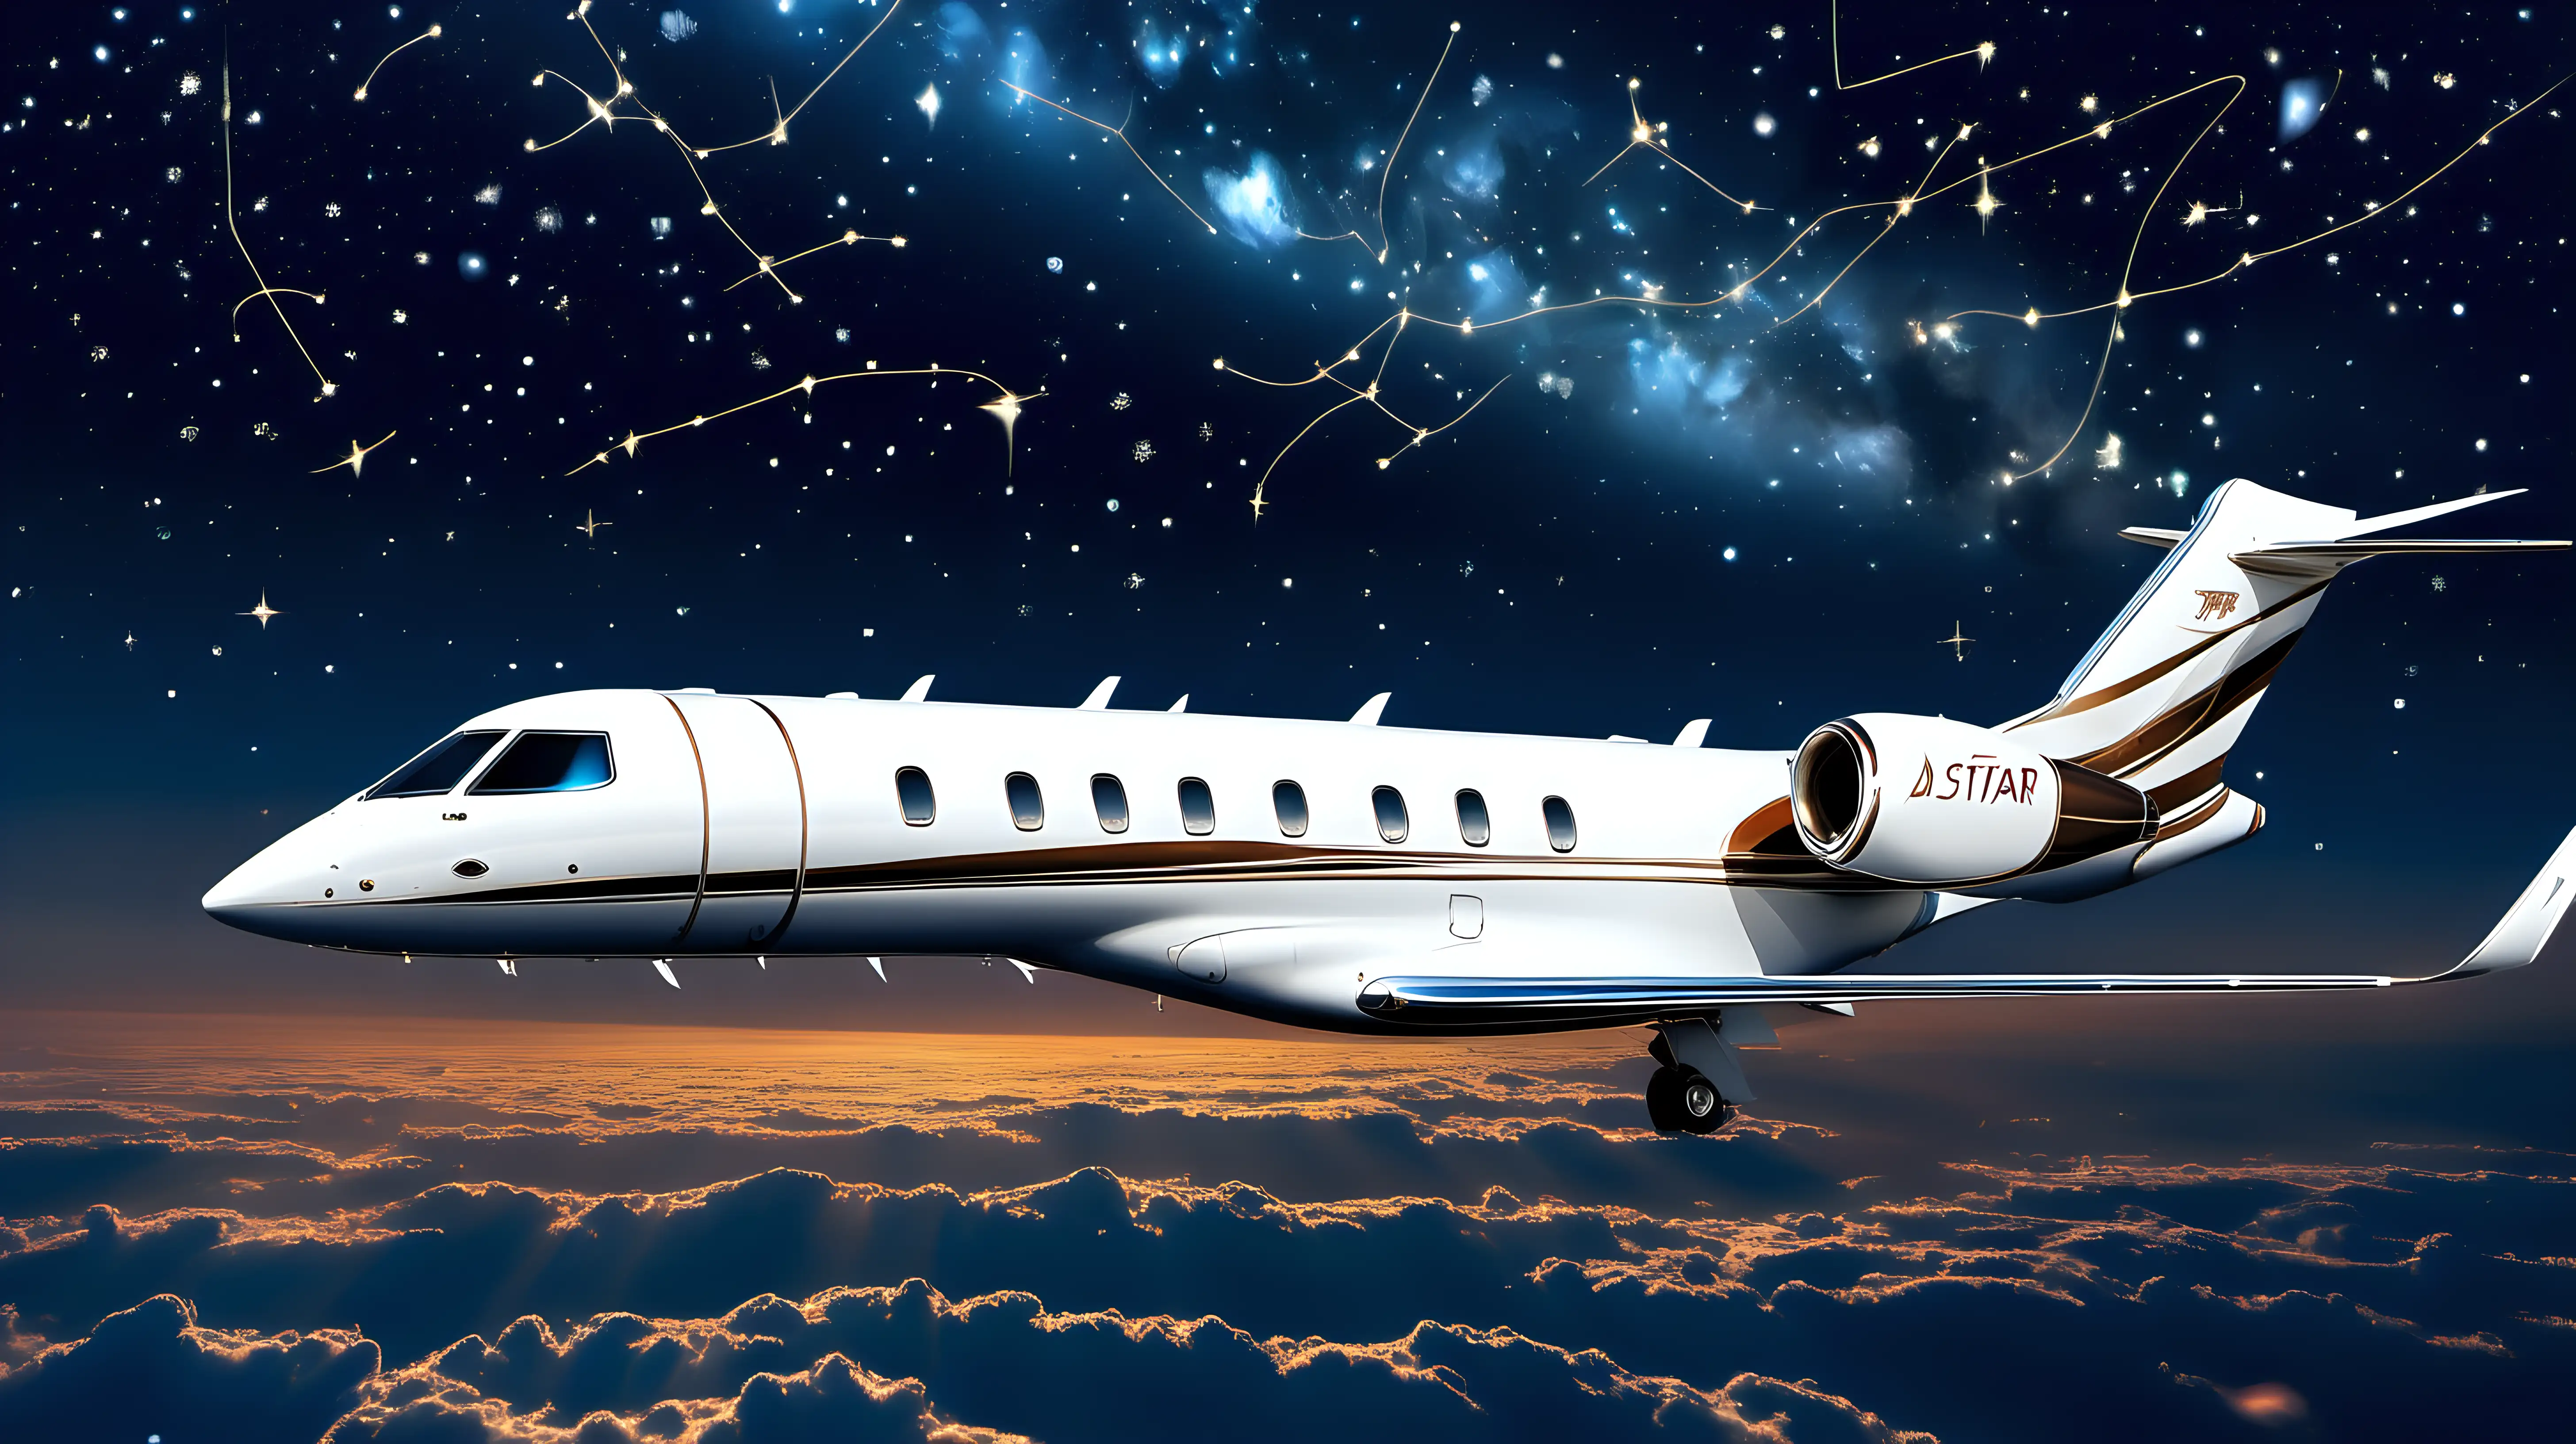 Luxurious Private Jet Soaring through Starry Night Sky